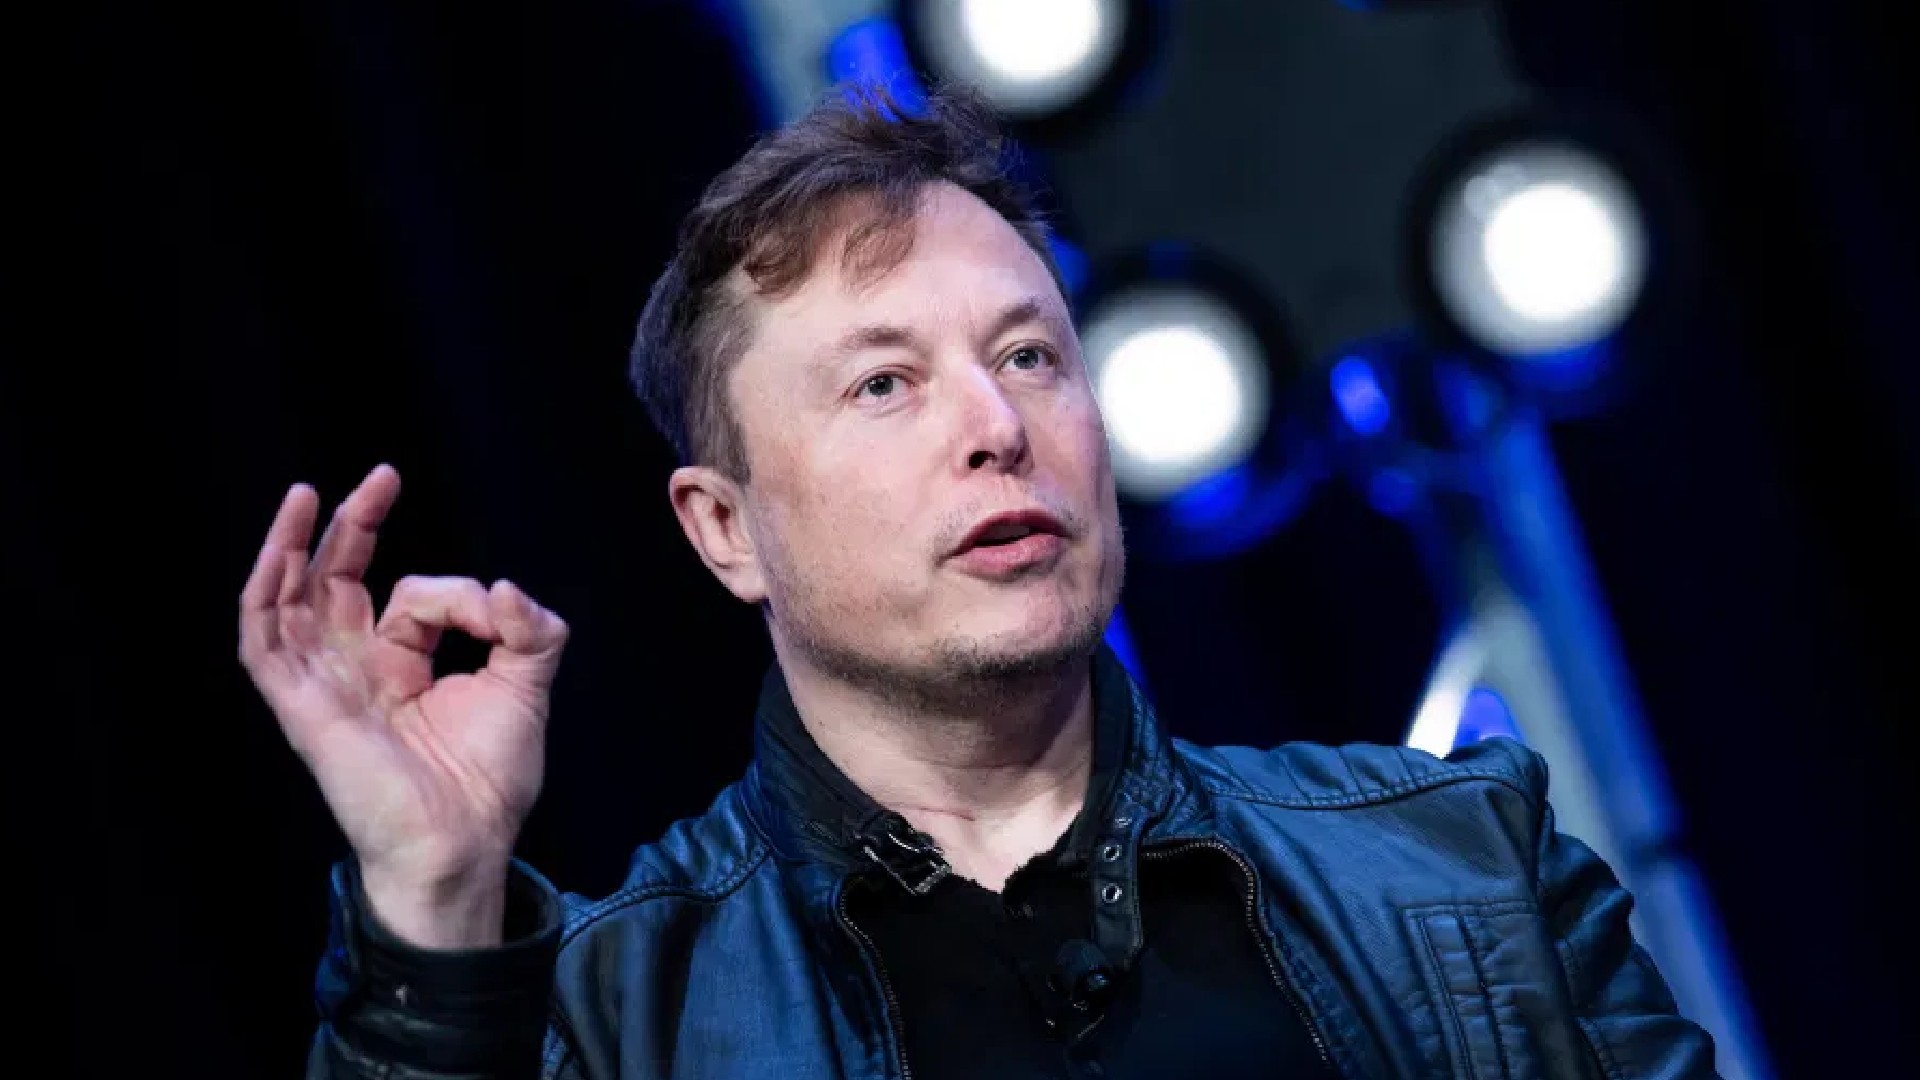 Dogecoin To Become A Viable Payment Option: Elon Musk Shares ‘Super Important’ Proposal